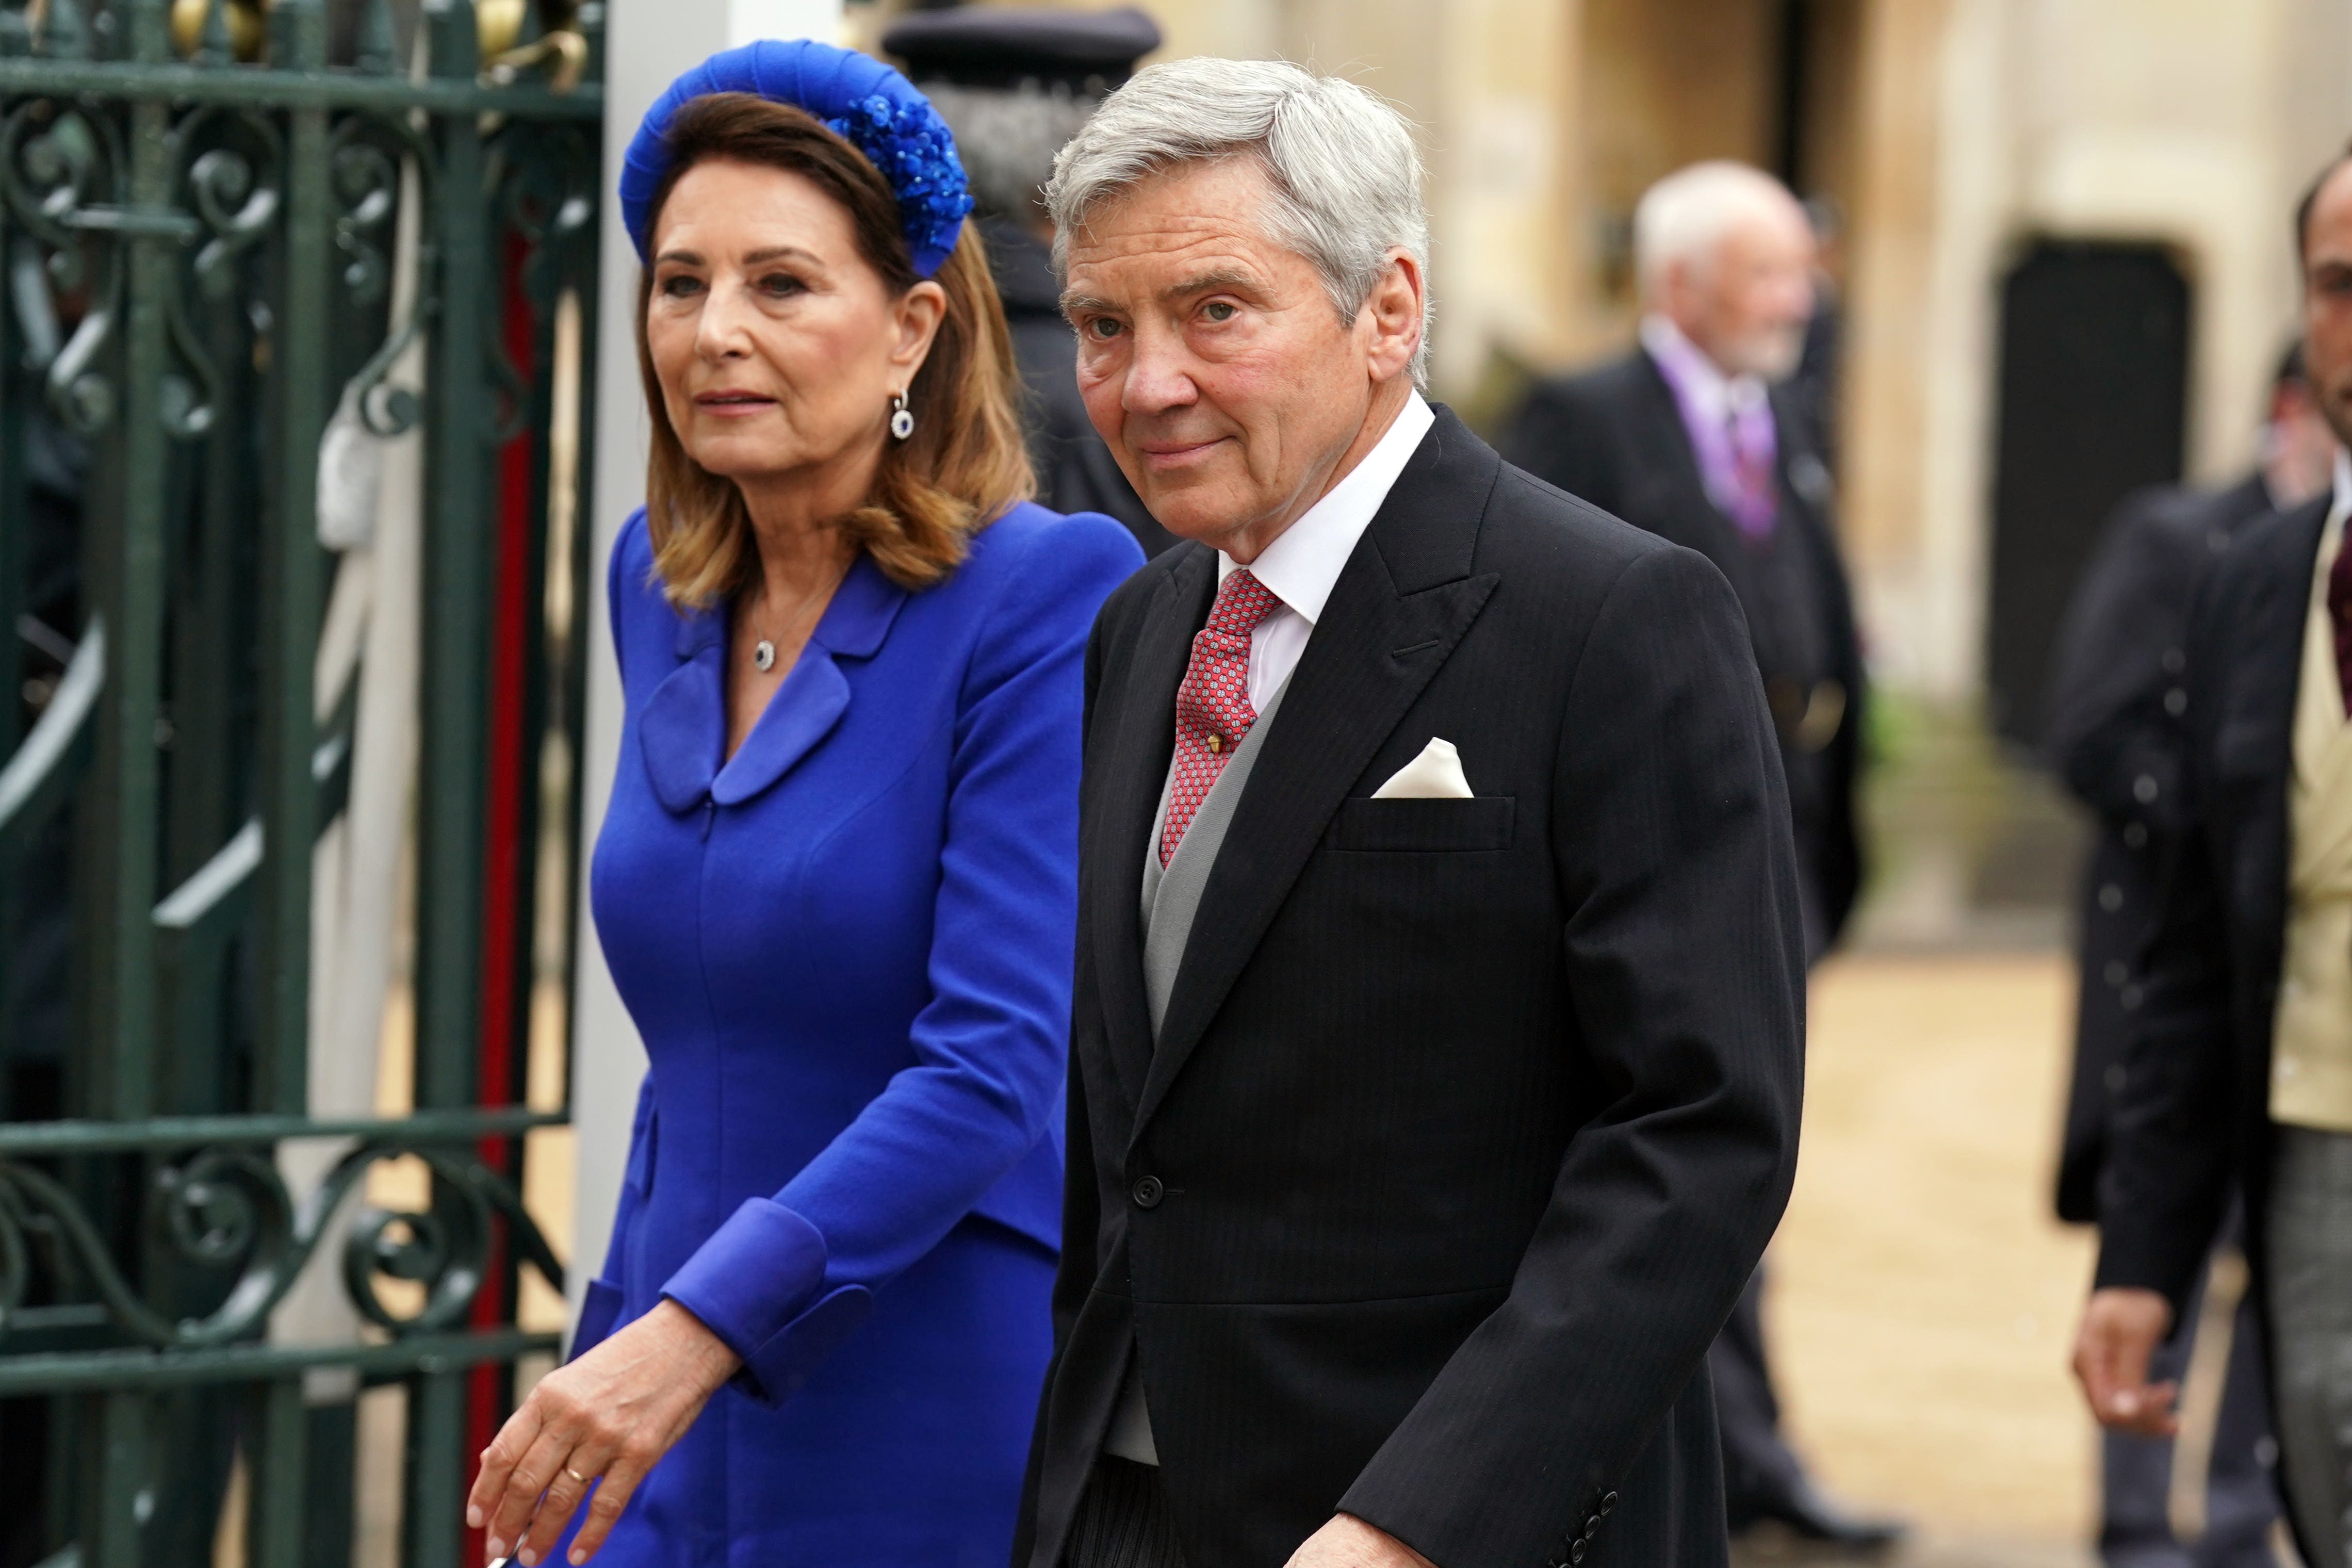 Carole Middleton with her husband Michael